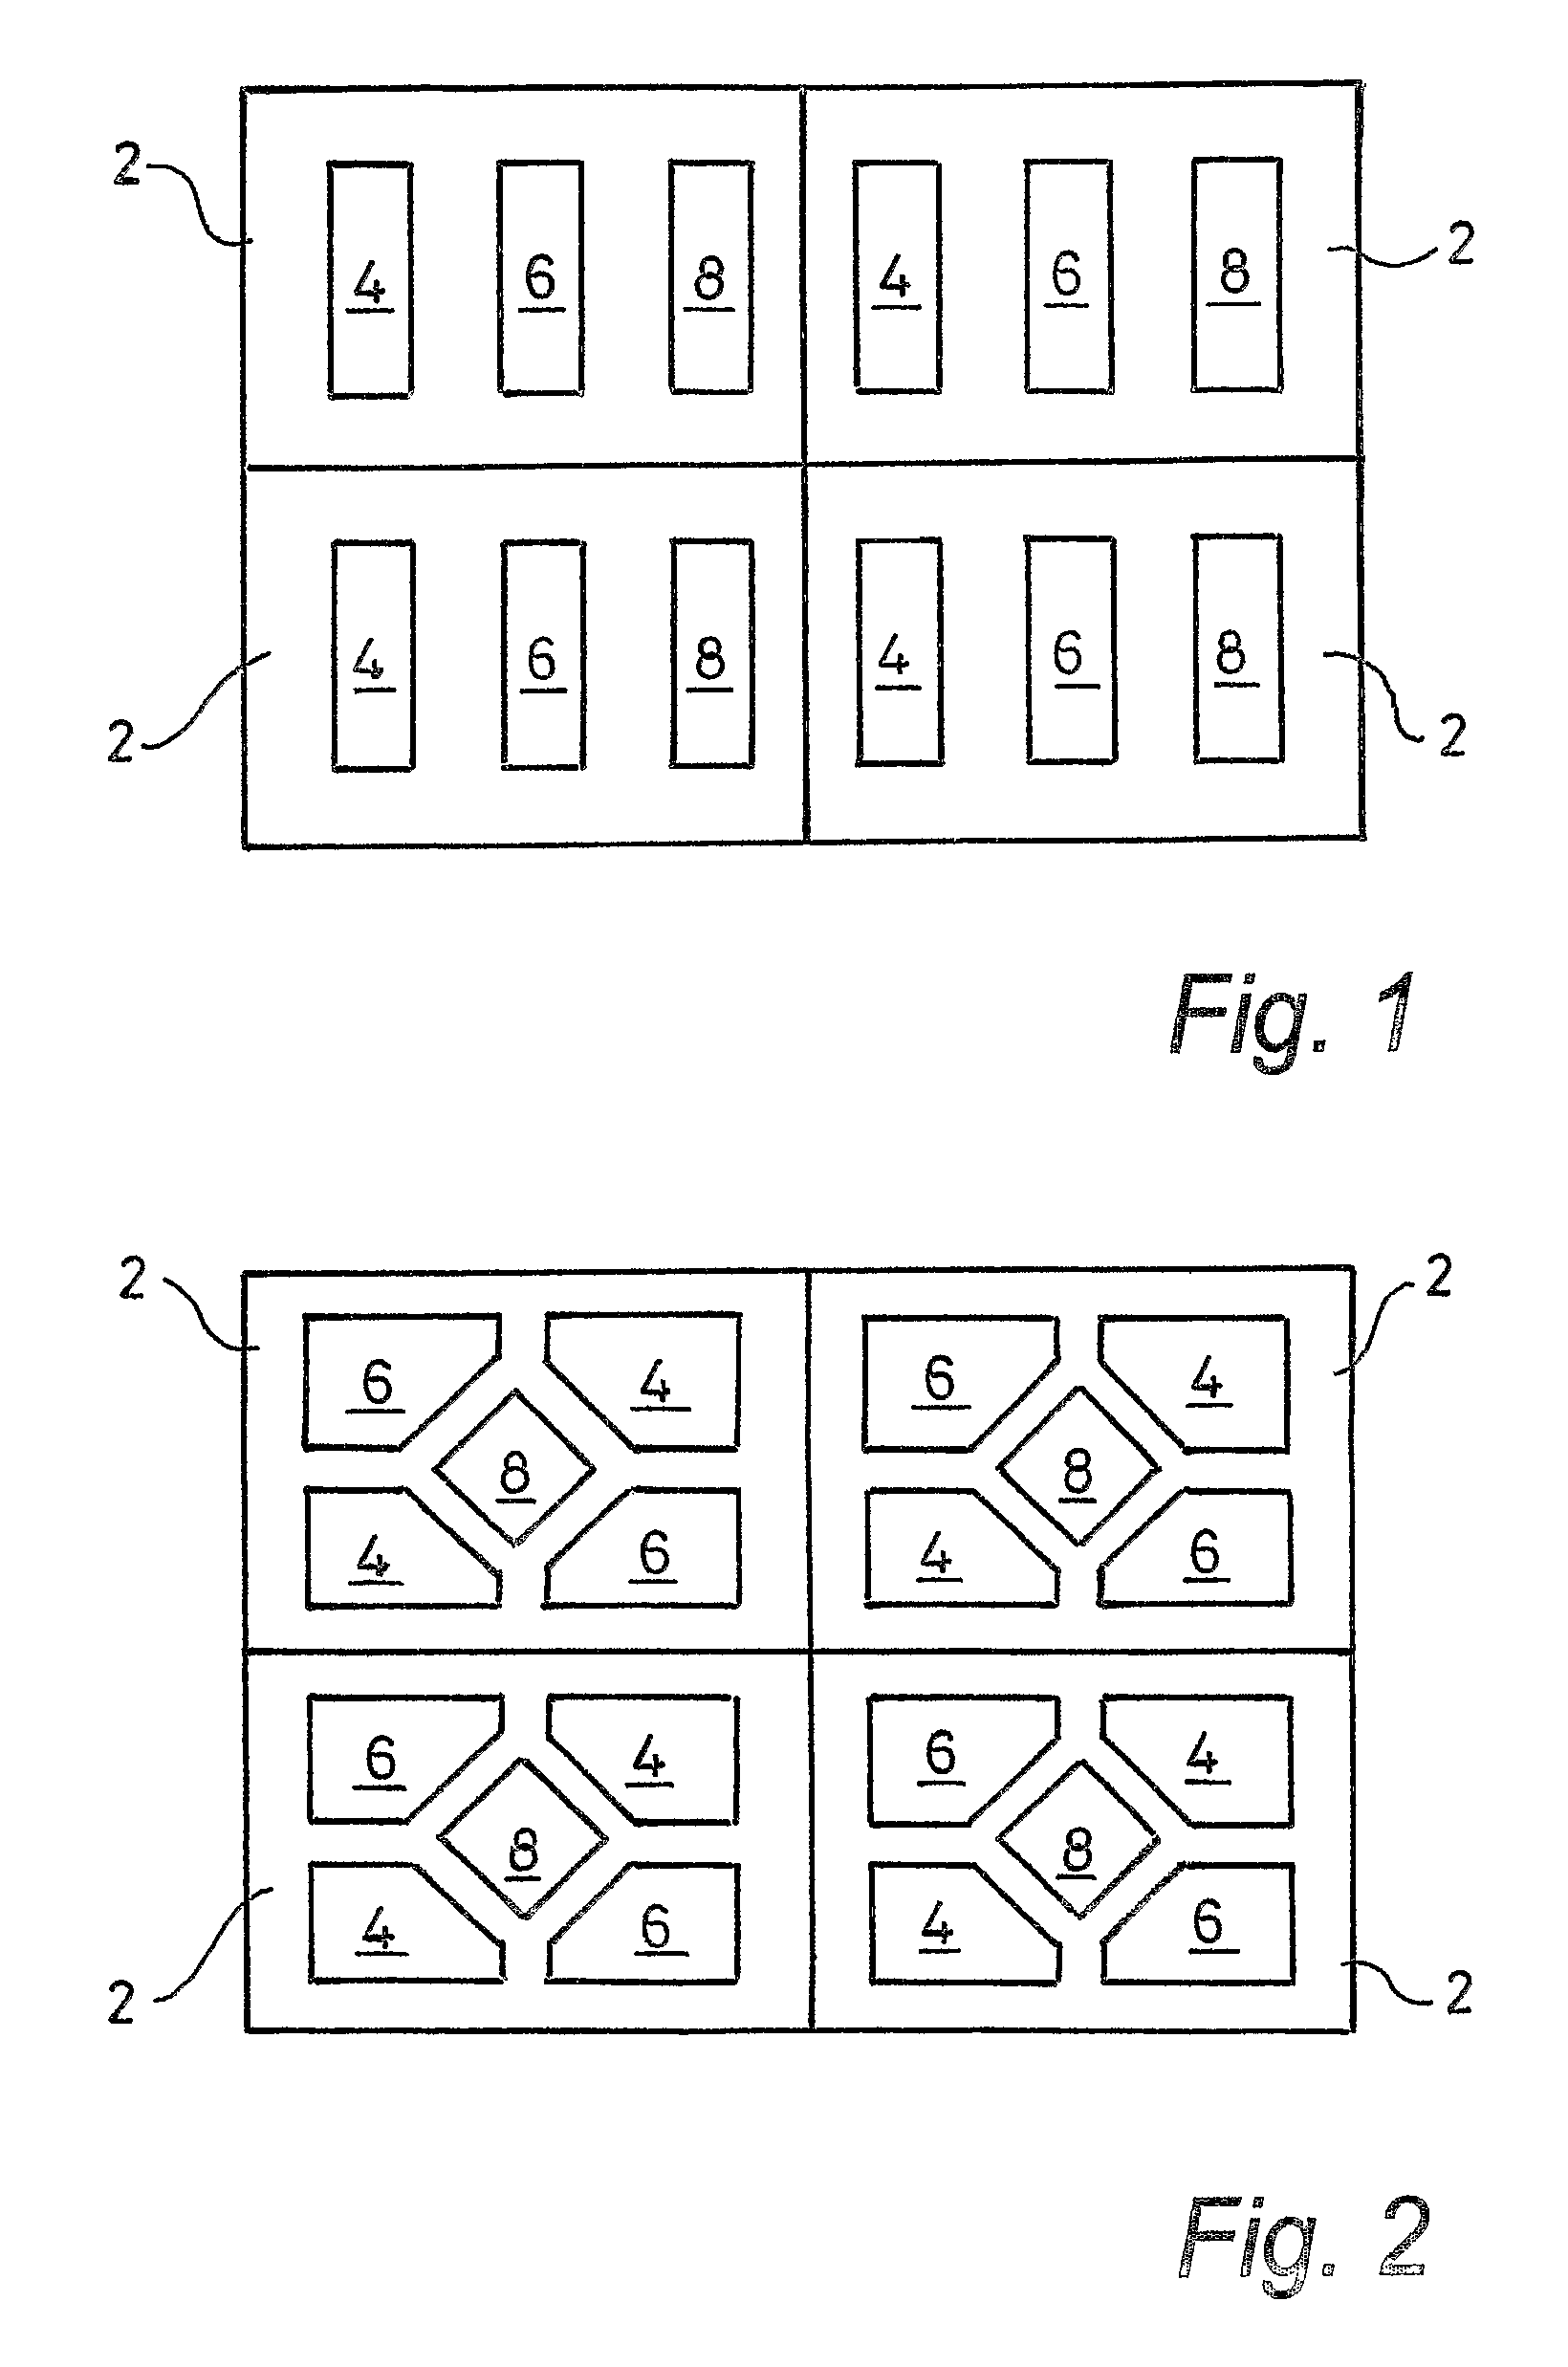 Optoelectronic display and method of manufacturing the same